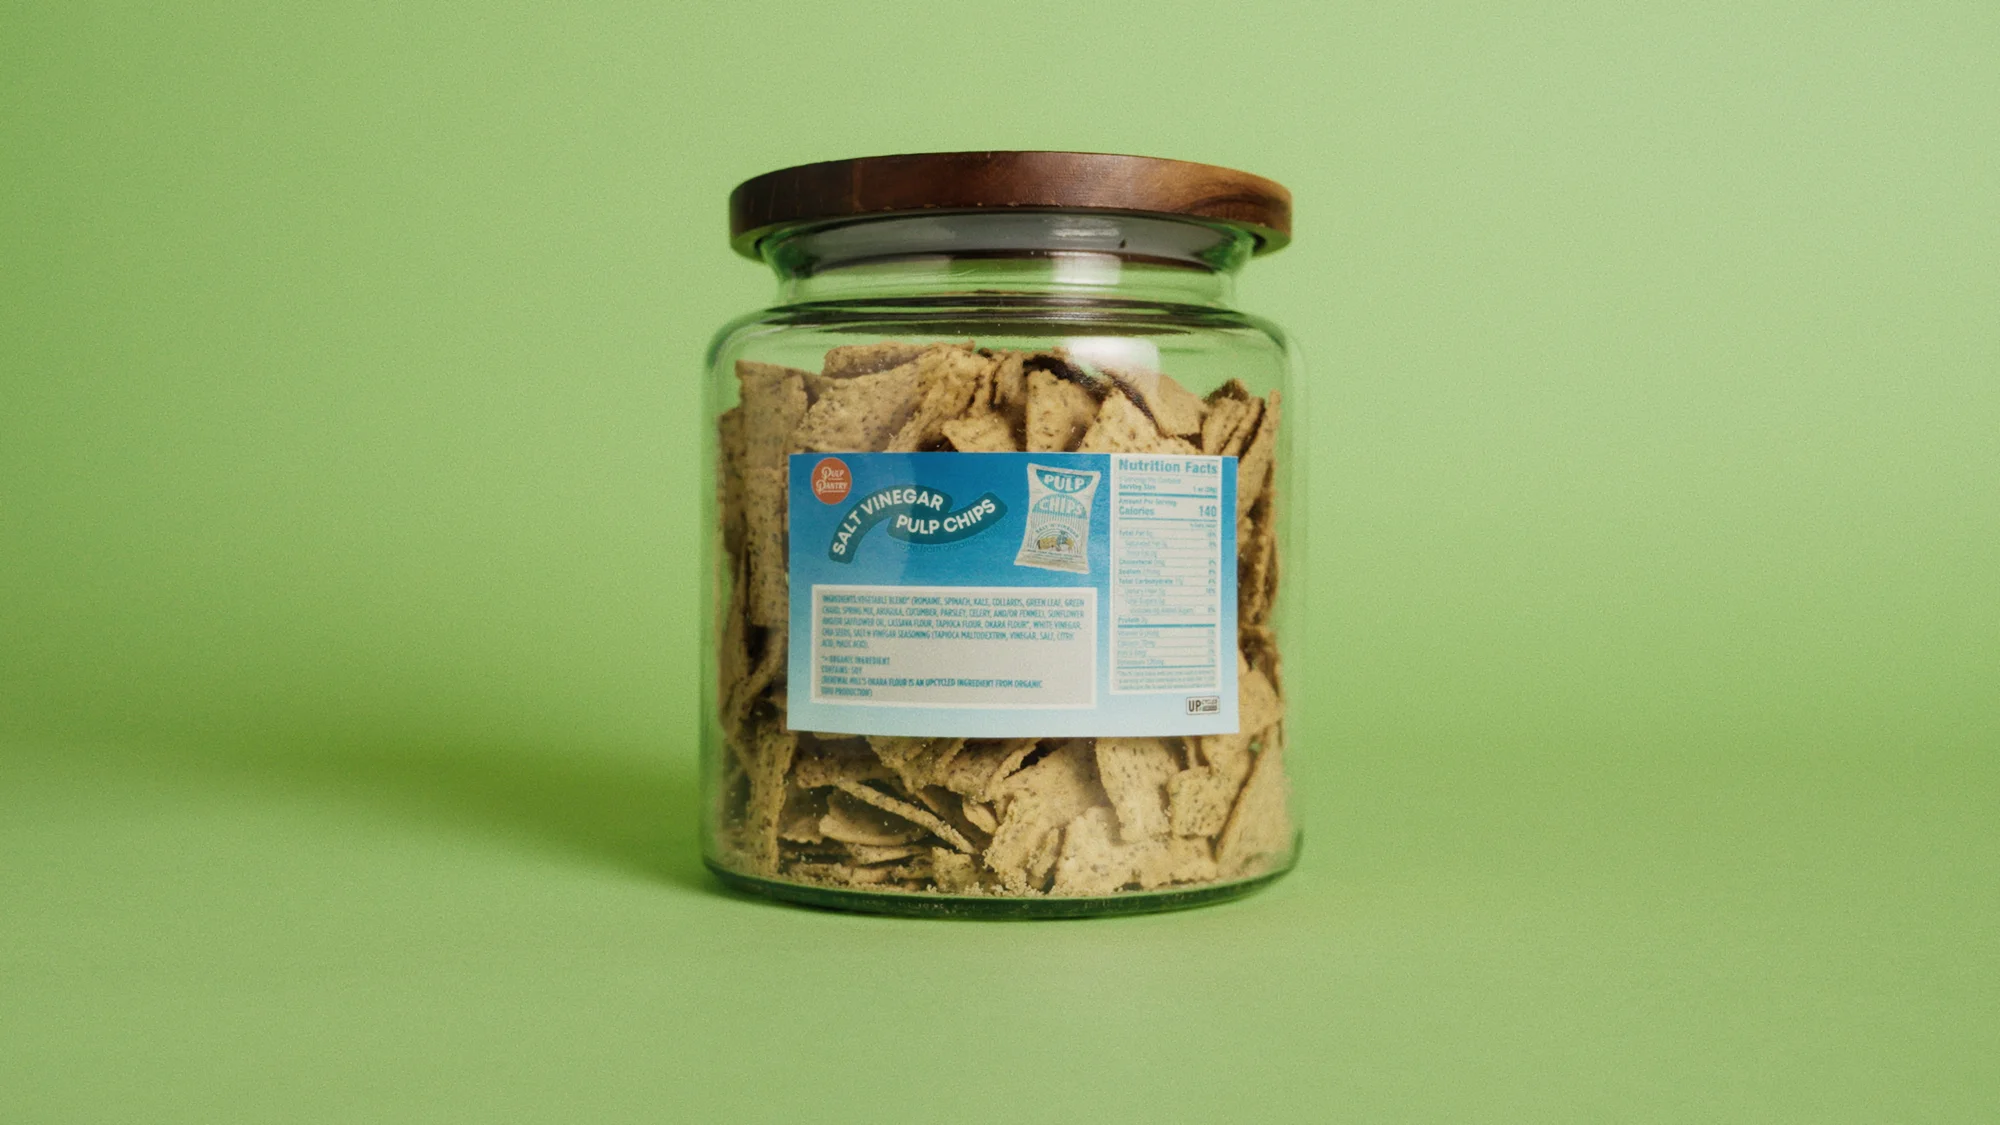 Pulp Pantry manufactures vegetable chips from upcycled ingredients and were chosen to test their products at select Google foodspaces as part of the Single-Use Plastics Challenge.